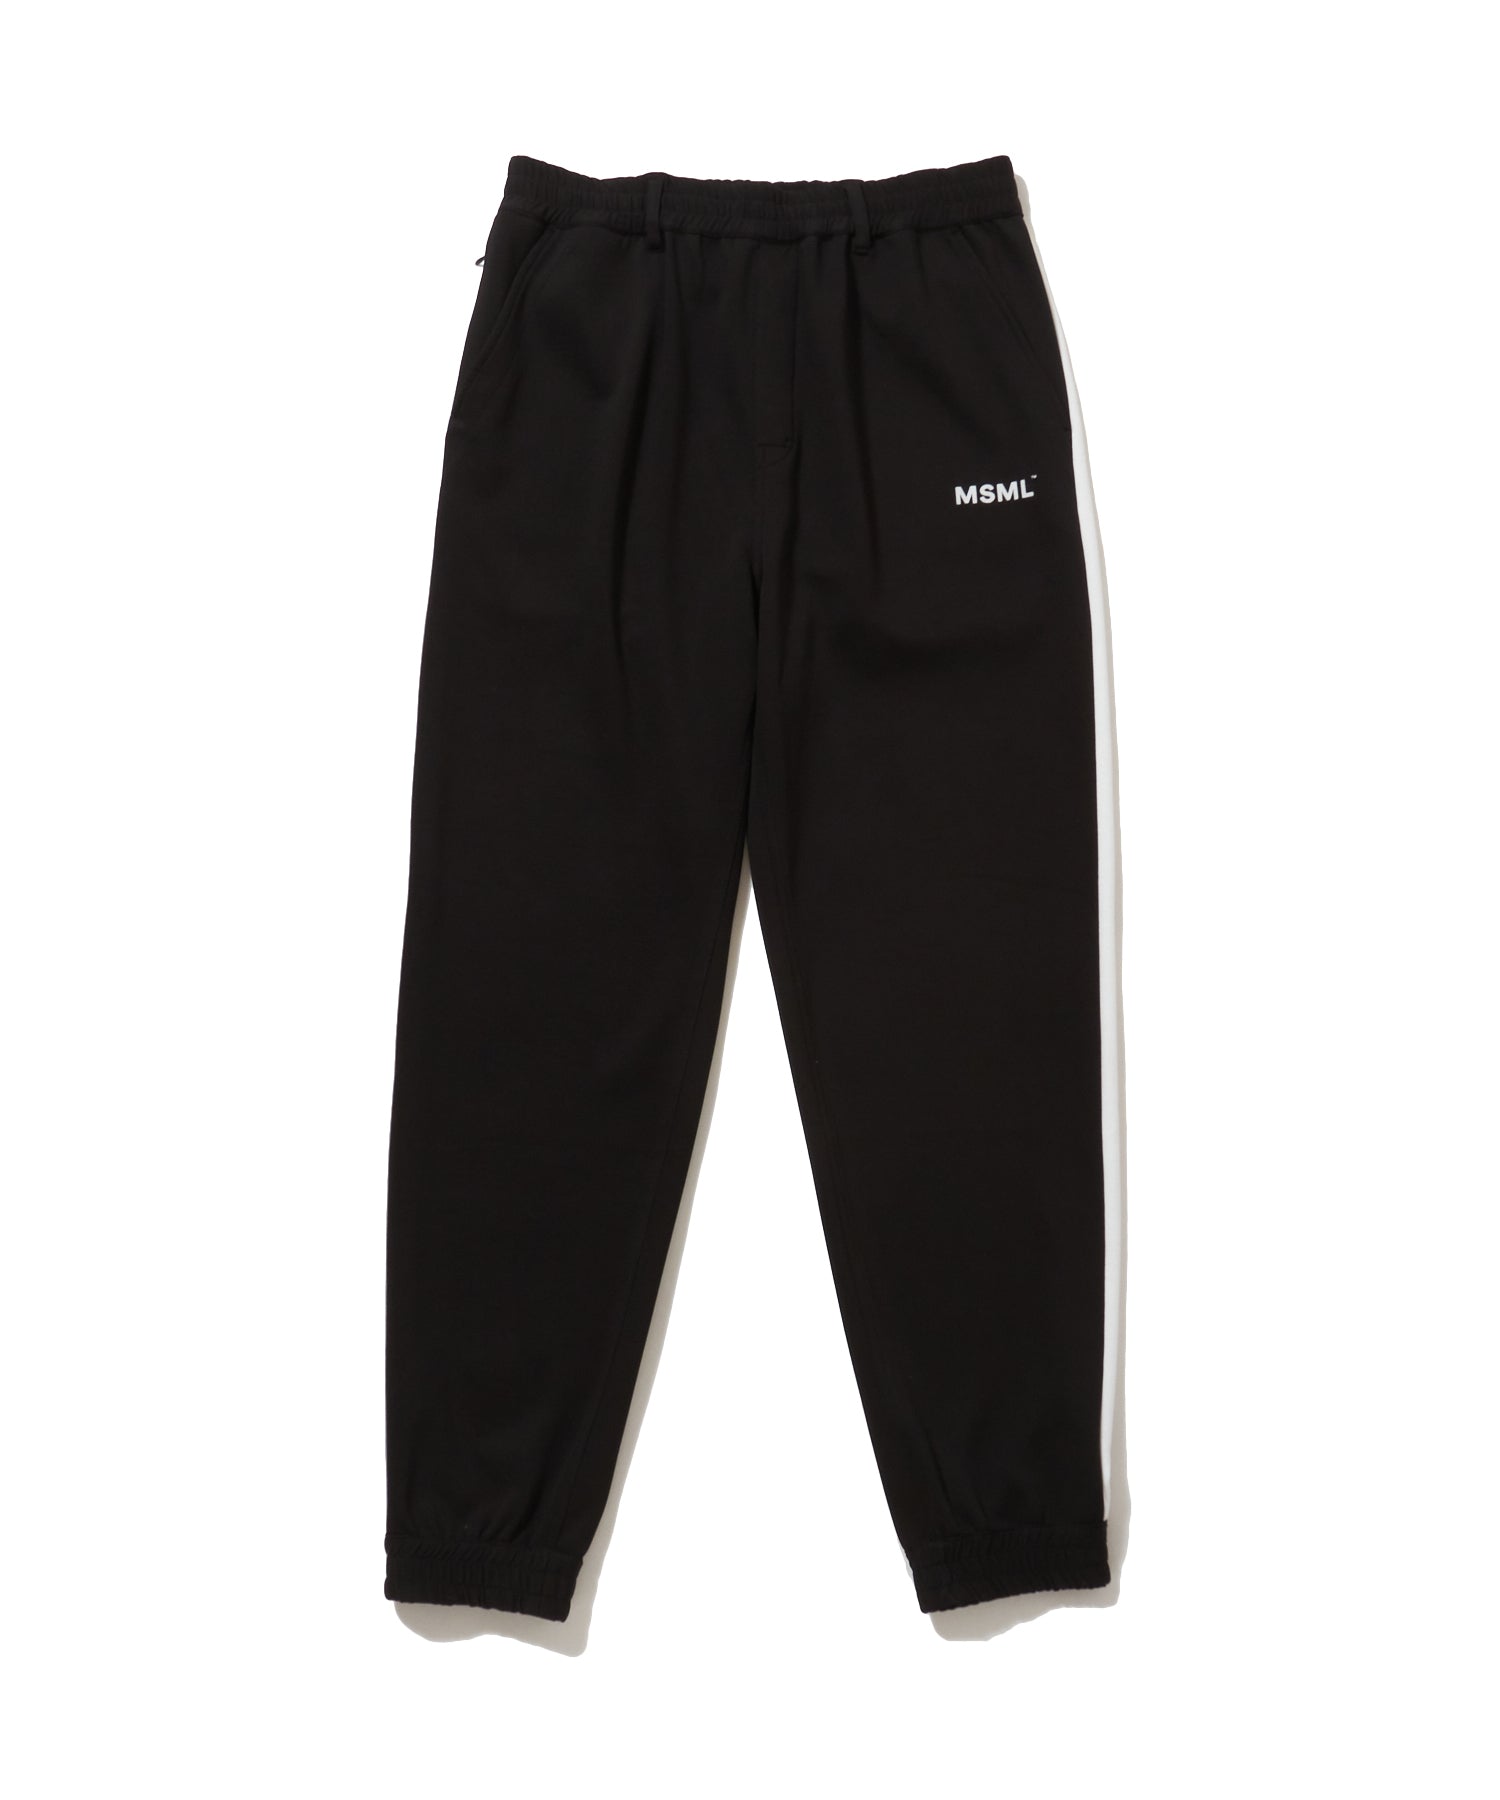 RELAX TRACK PANTS